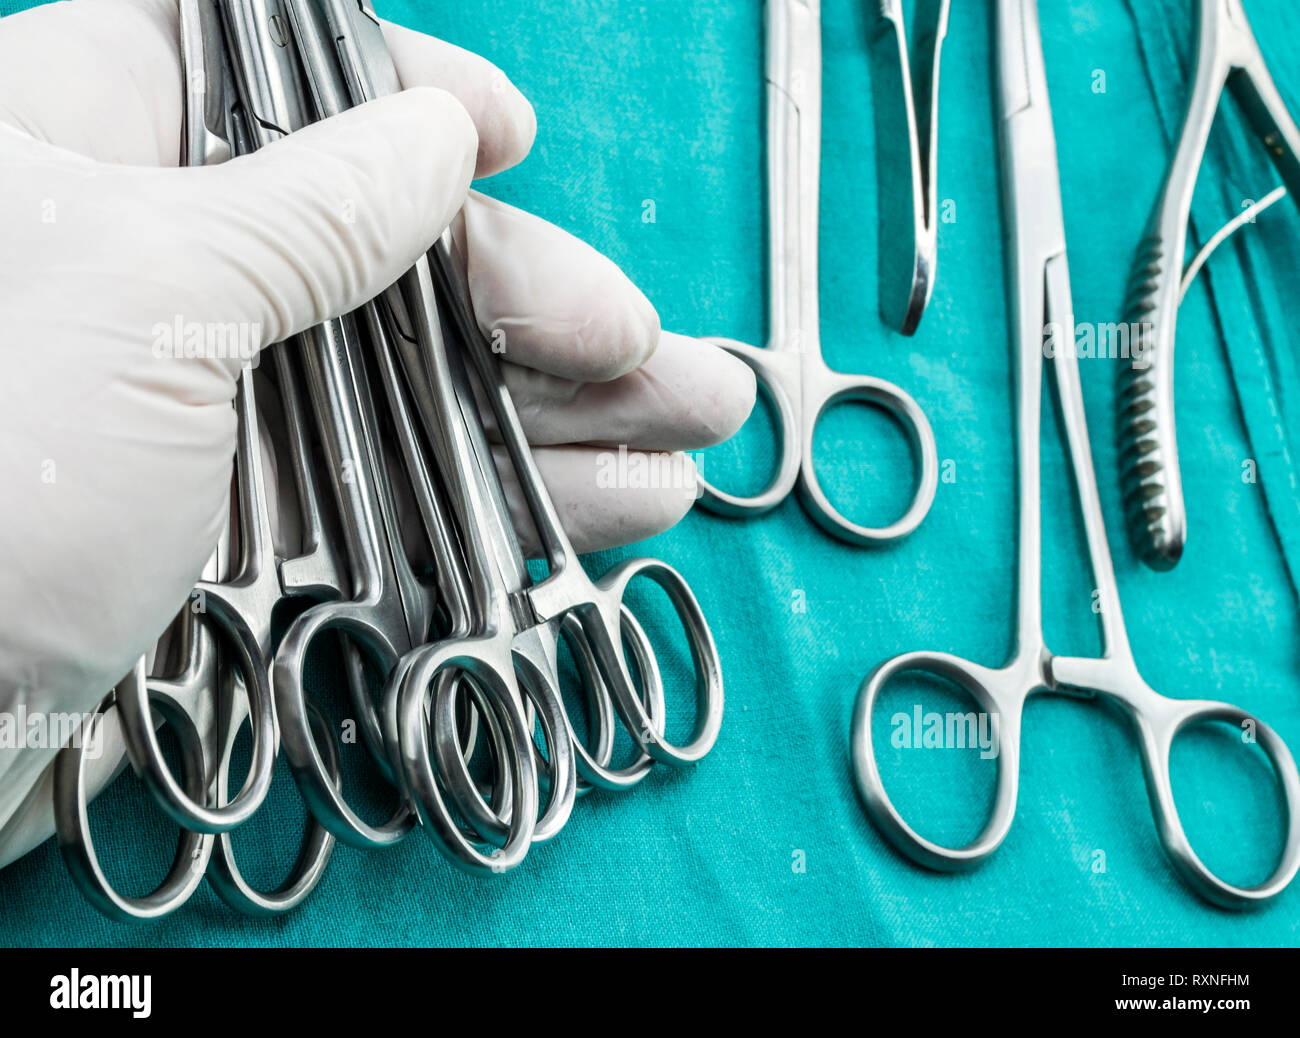 Surgeon working in operating room, hands with gloves holding scissors sutures, conceptual image, composicon horizontal Stock Photo